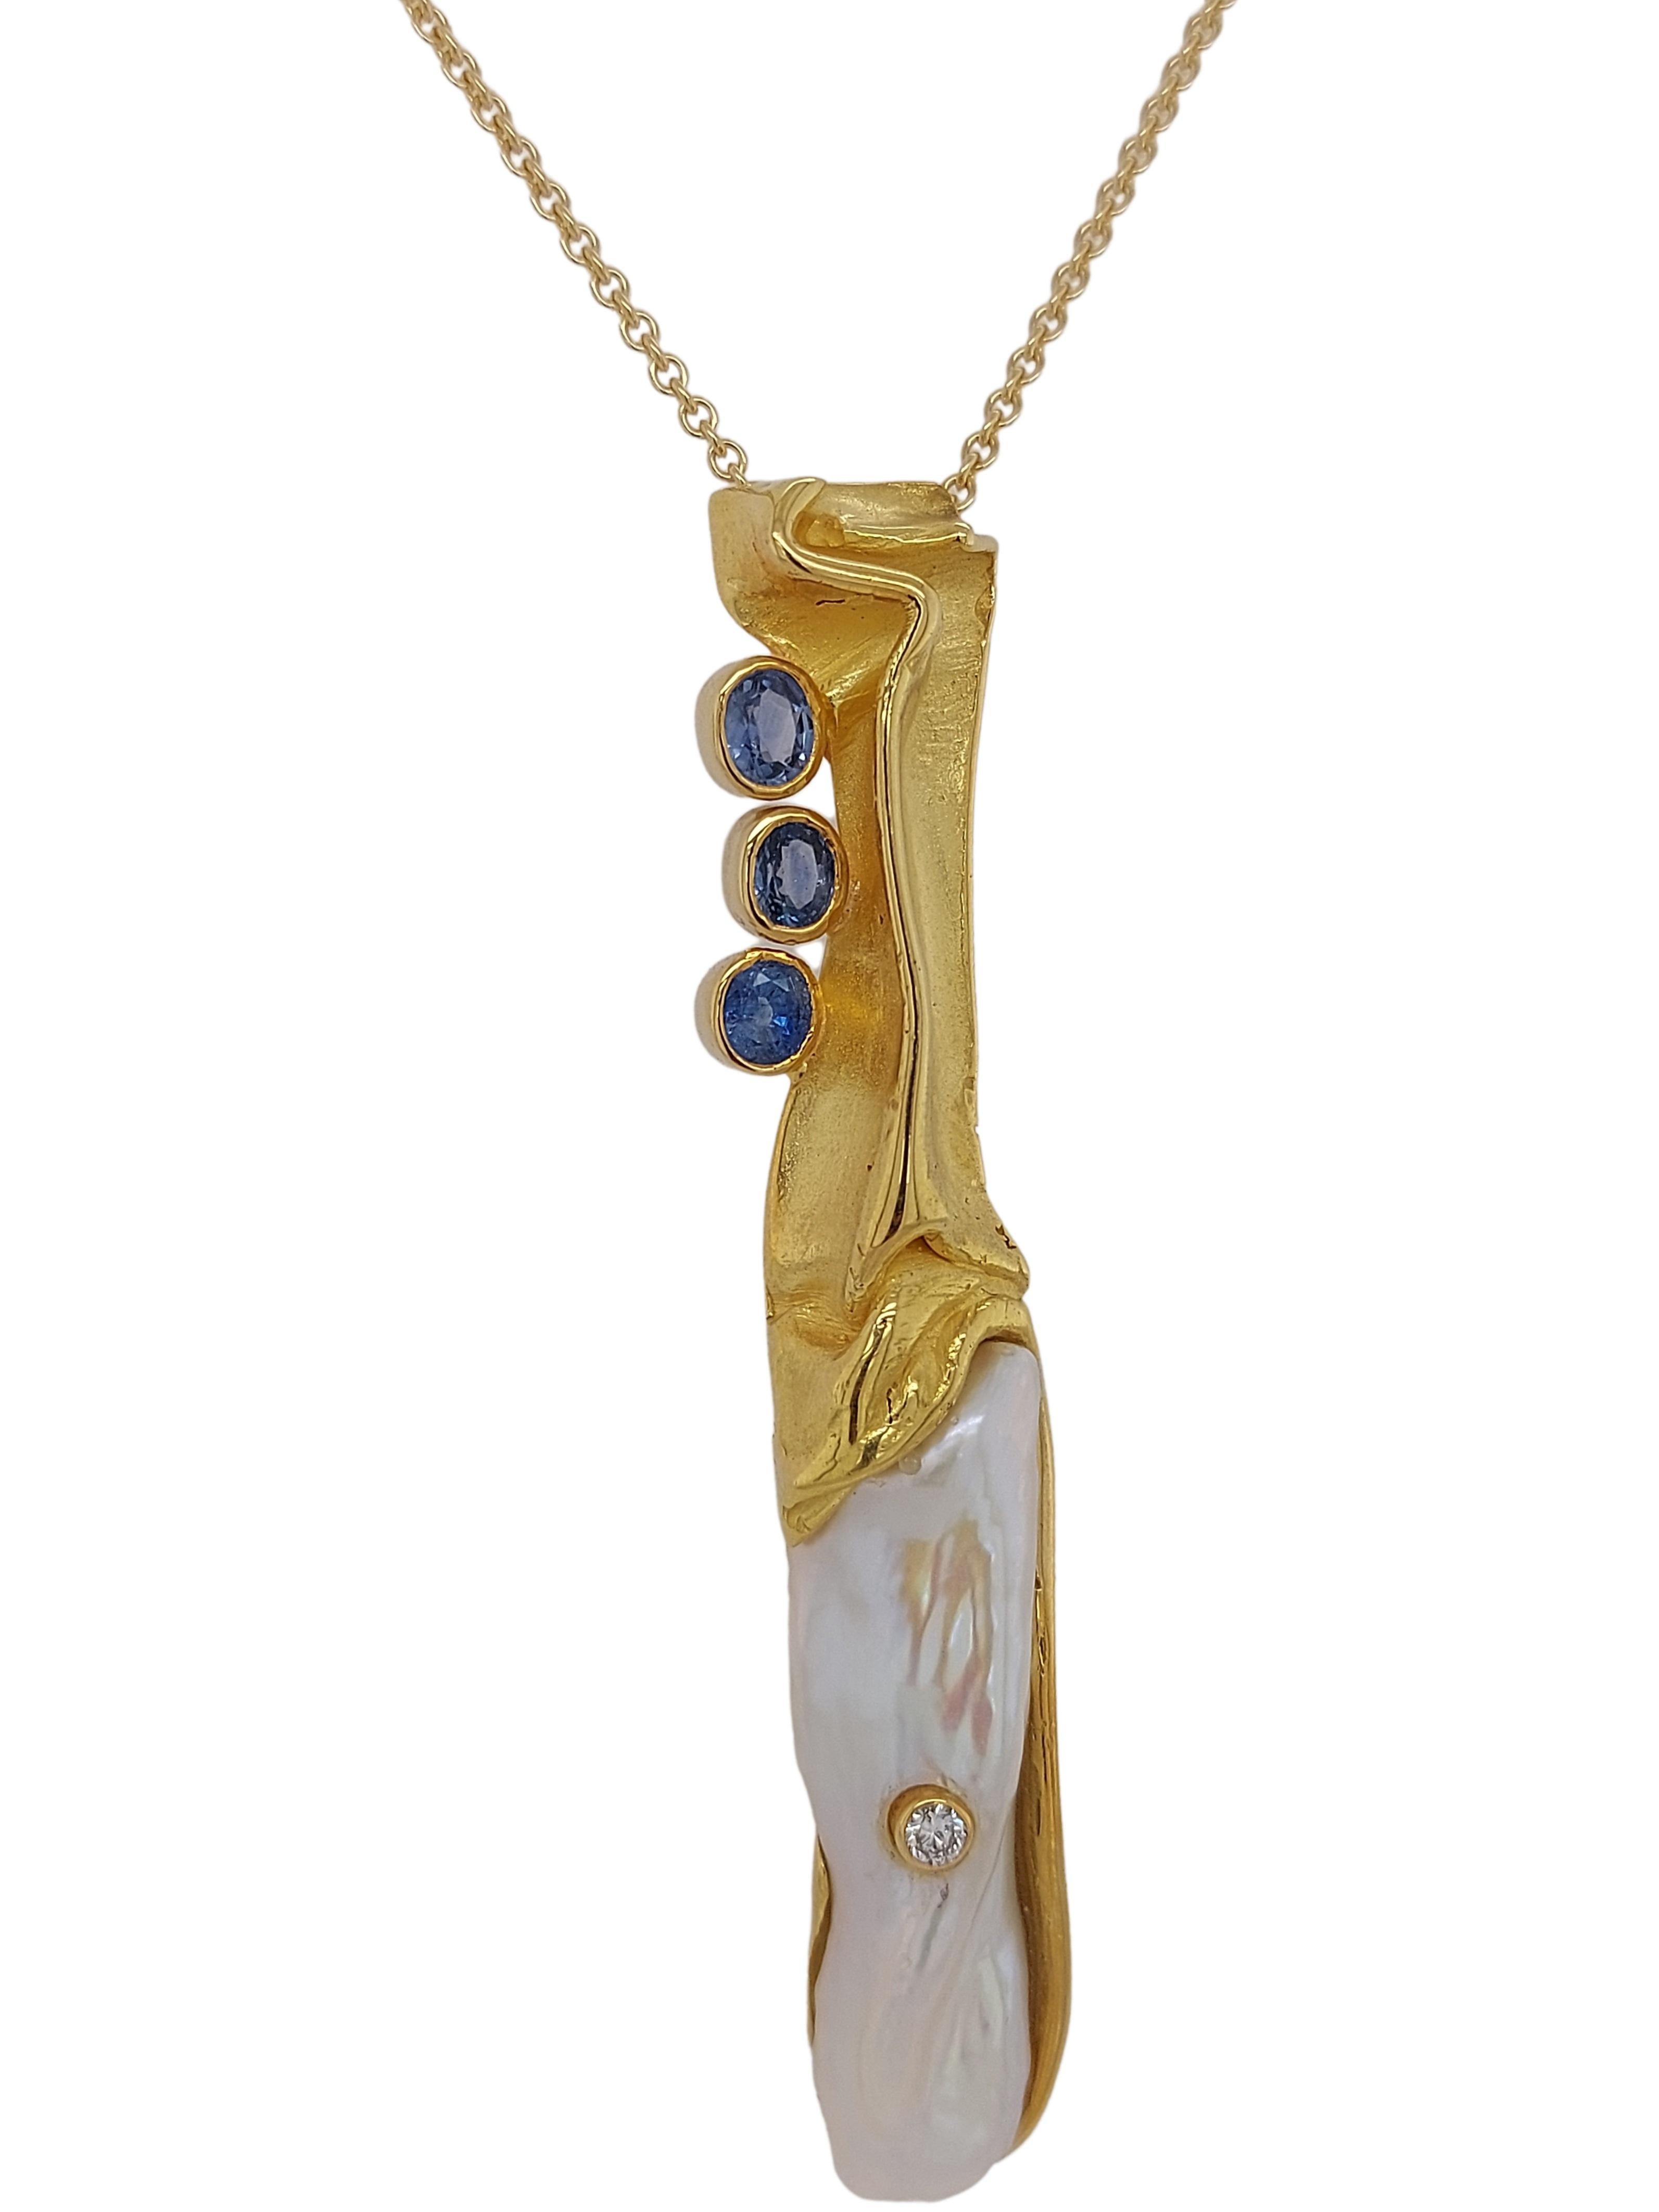 18kt Yellow Gold Pendant /Necklace by De Saedeleer with Pearl, Diamond, Sapphire For Sale